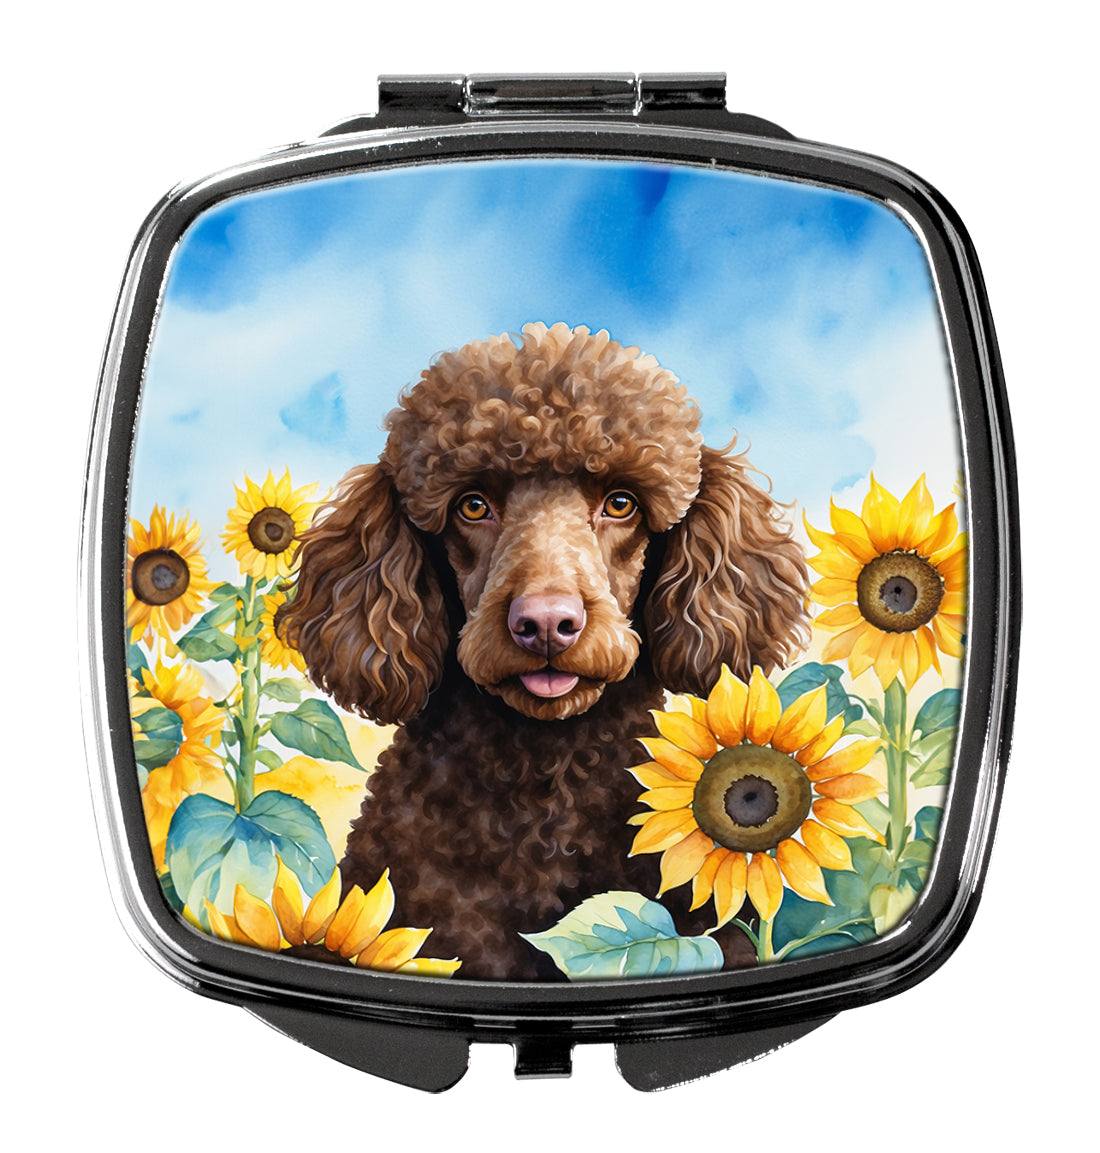 Buy this Chocolate Poodle in Sunflowers Compact Mirror